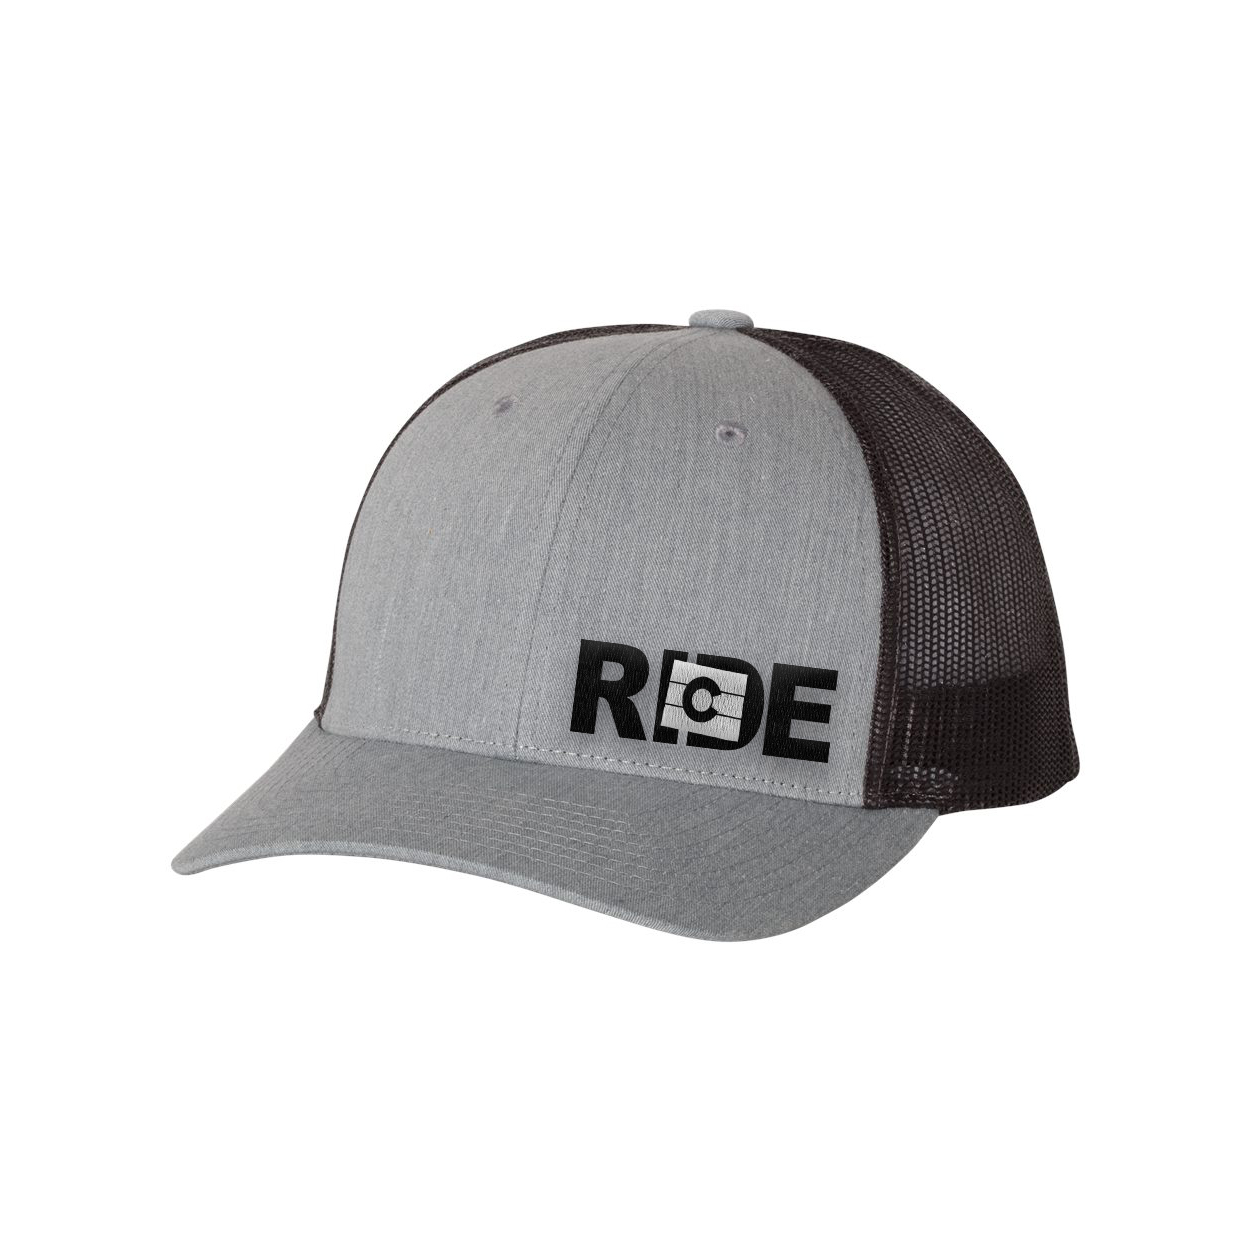 Ride Colorado Night Out Pro Embroidered Snapback Trucker Hat Heather Gray/Black